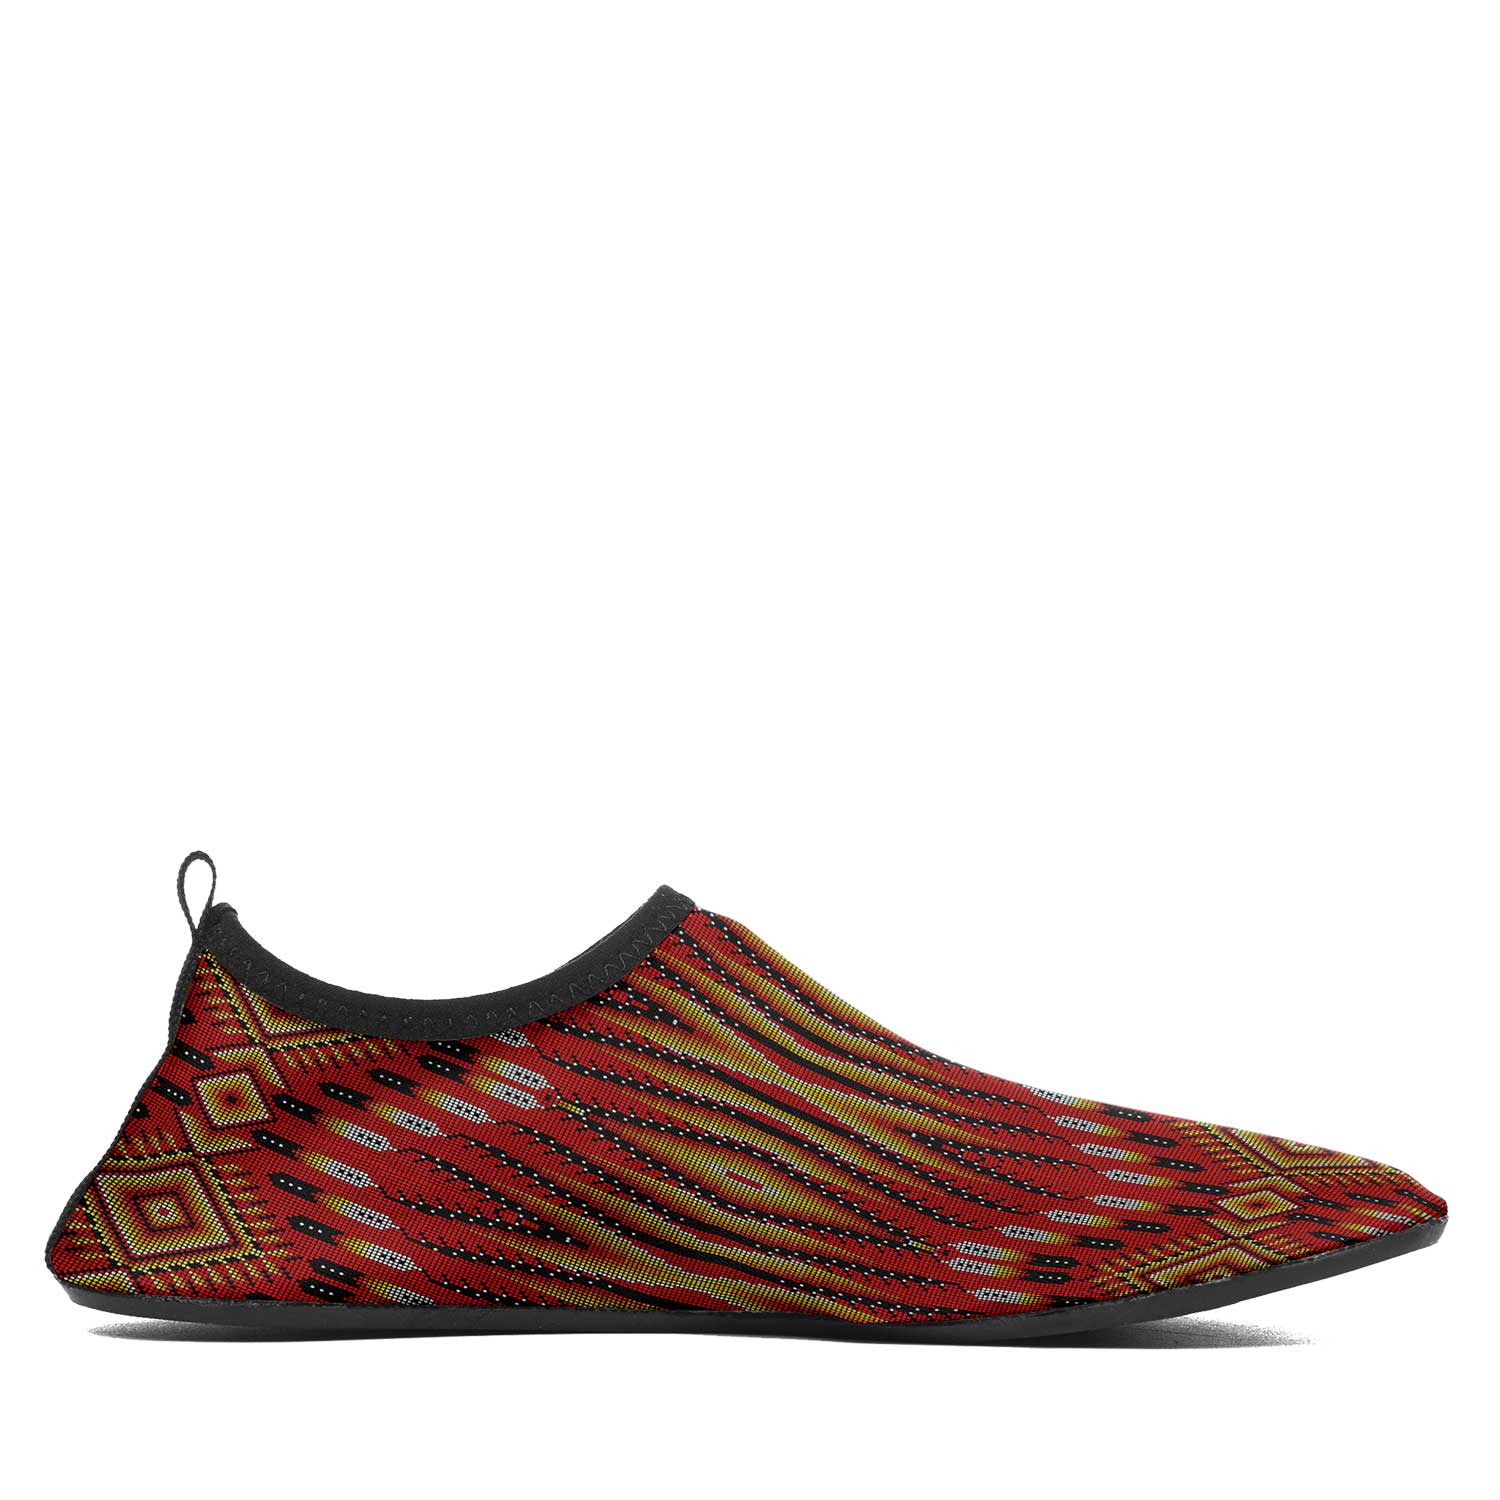 Fire Feather Red Sockamoccs